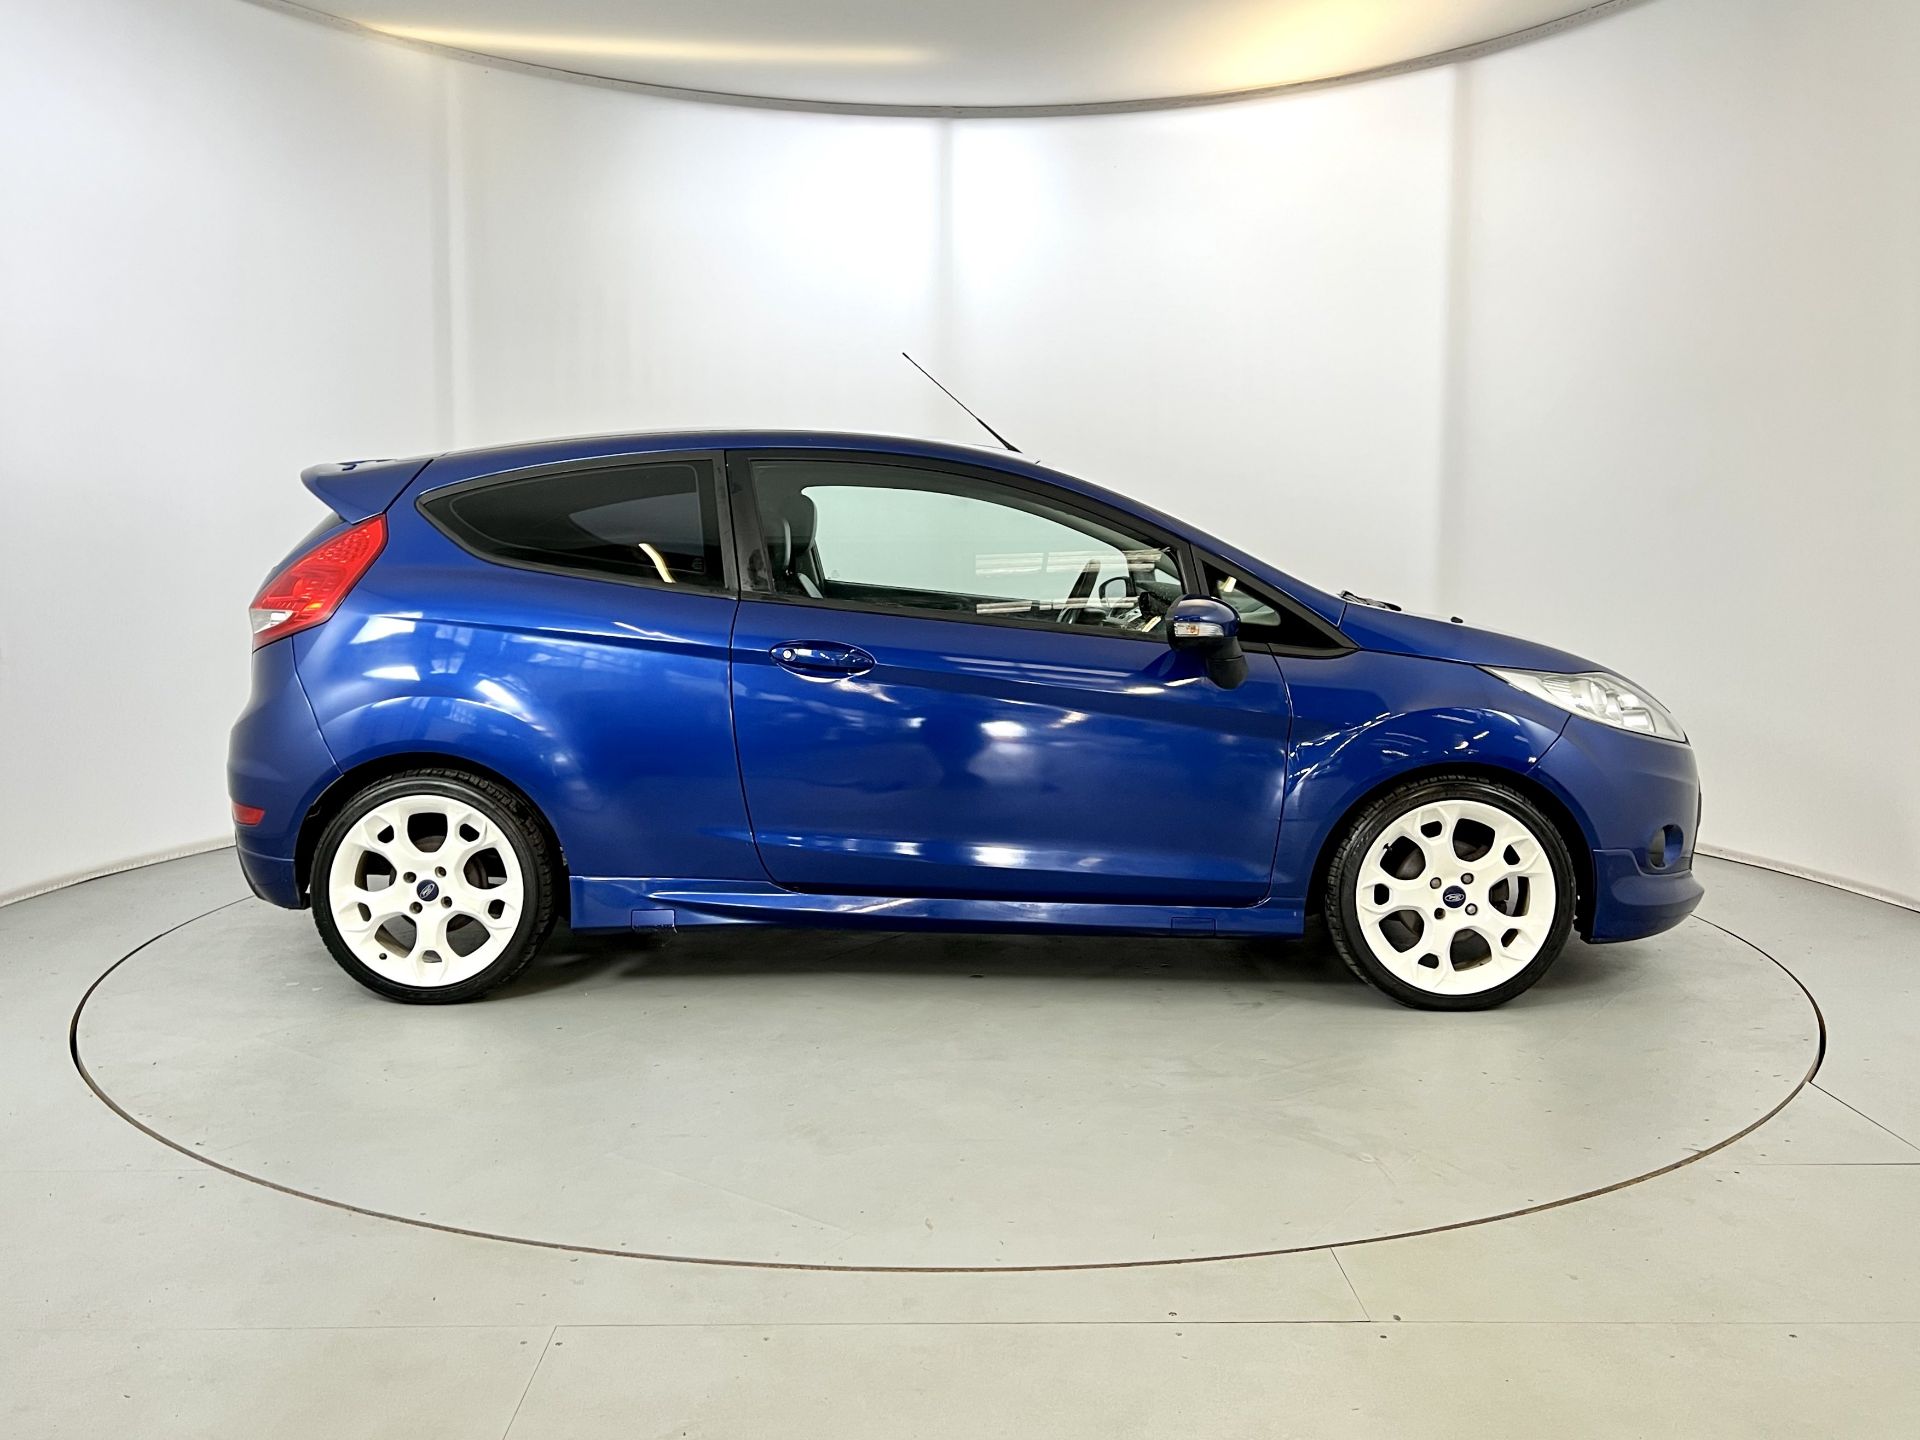 Ford Fiesta S1600 - Image 11 of 30